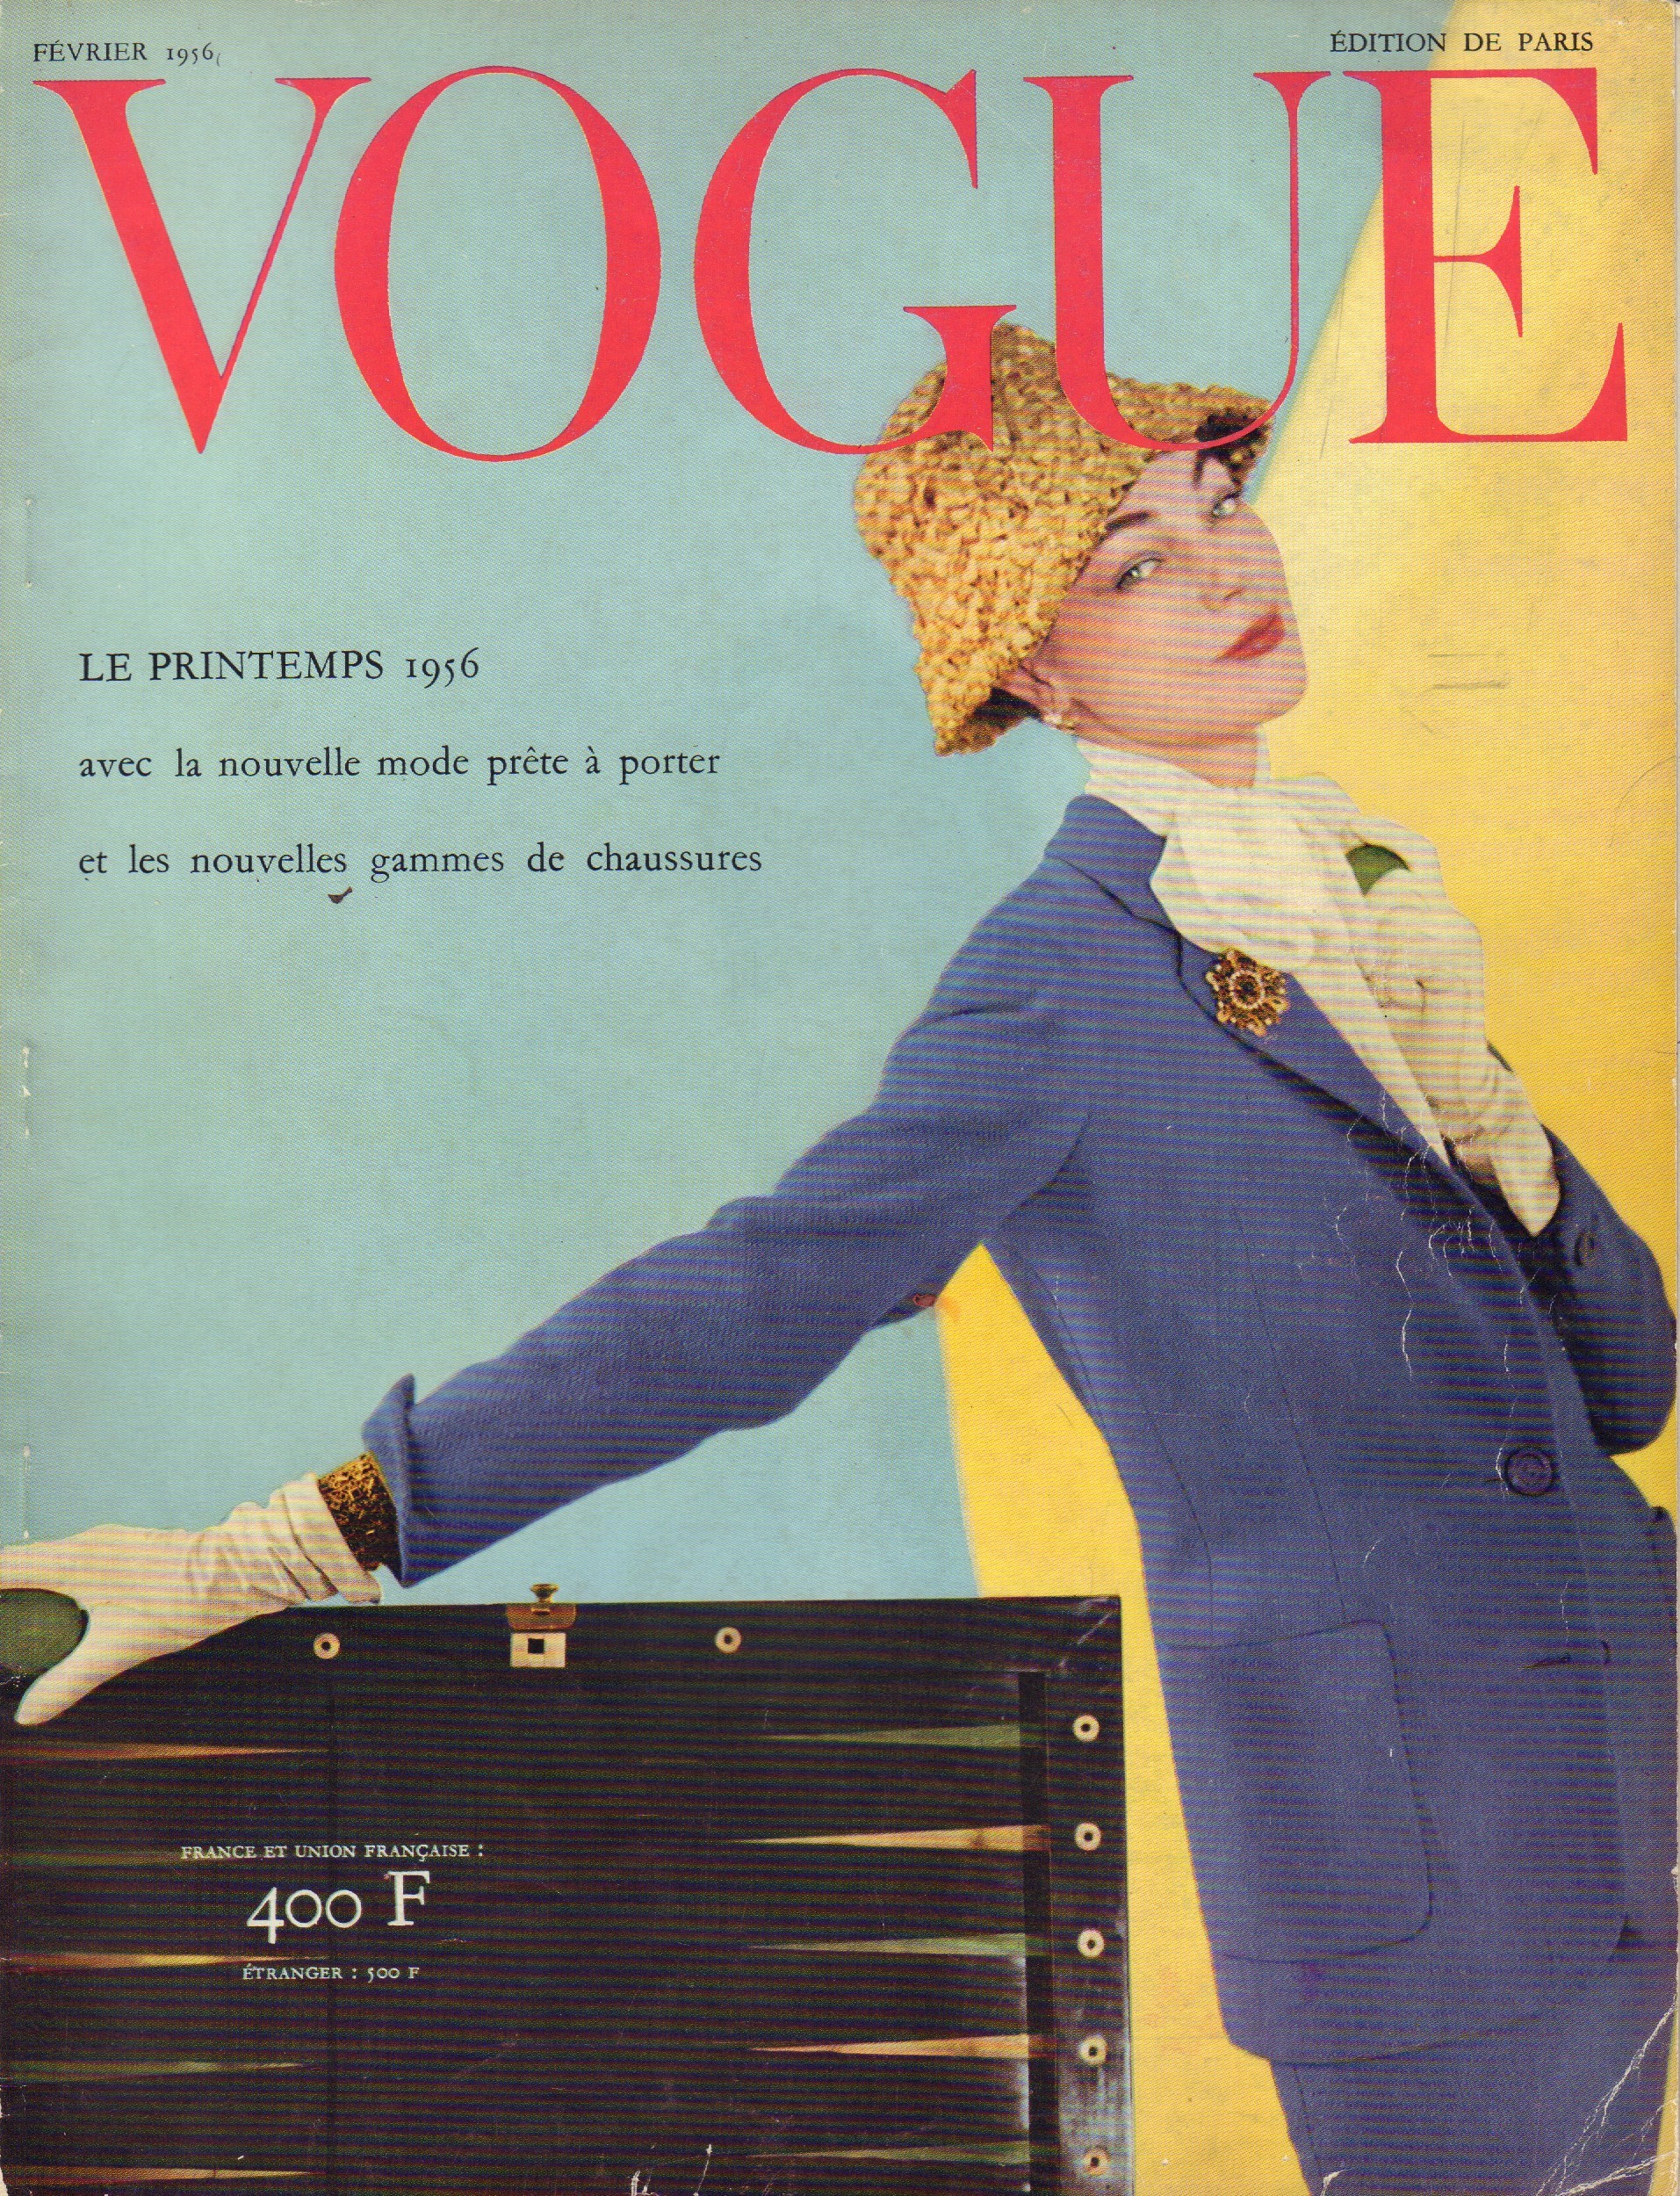 Vogue Fevrier 1956 - French Edition (February)